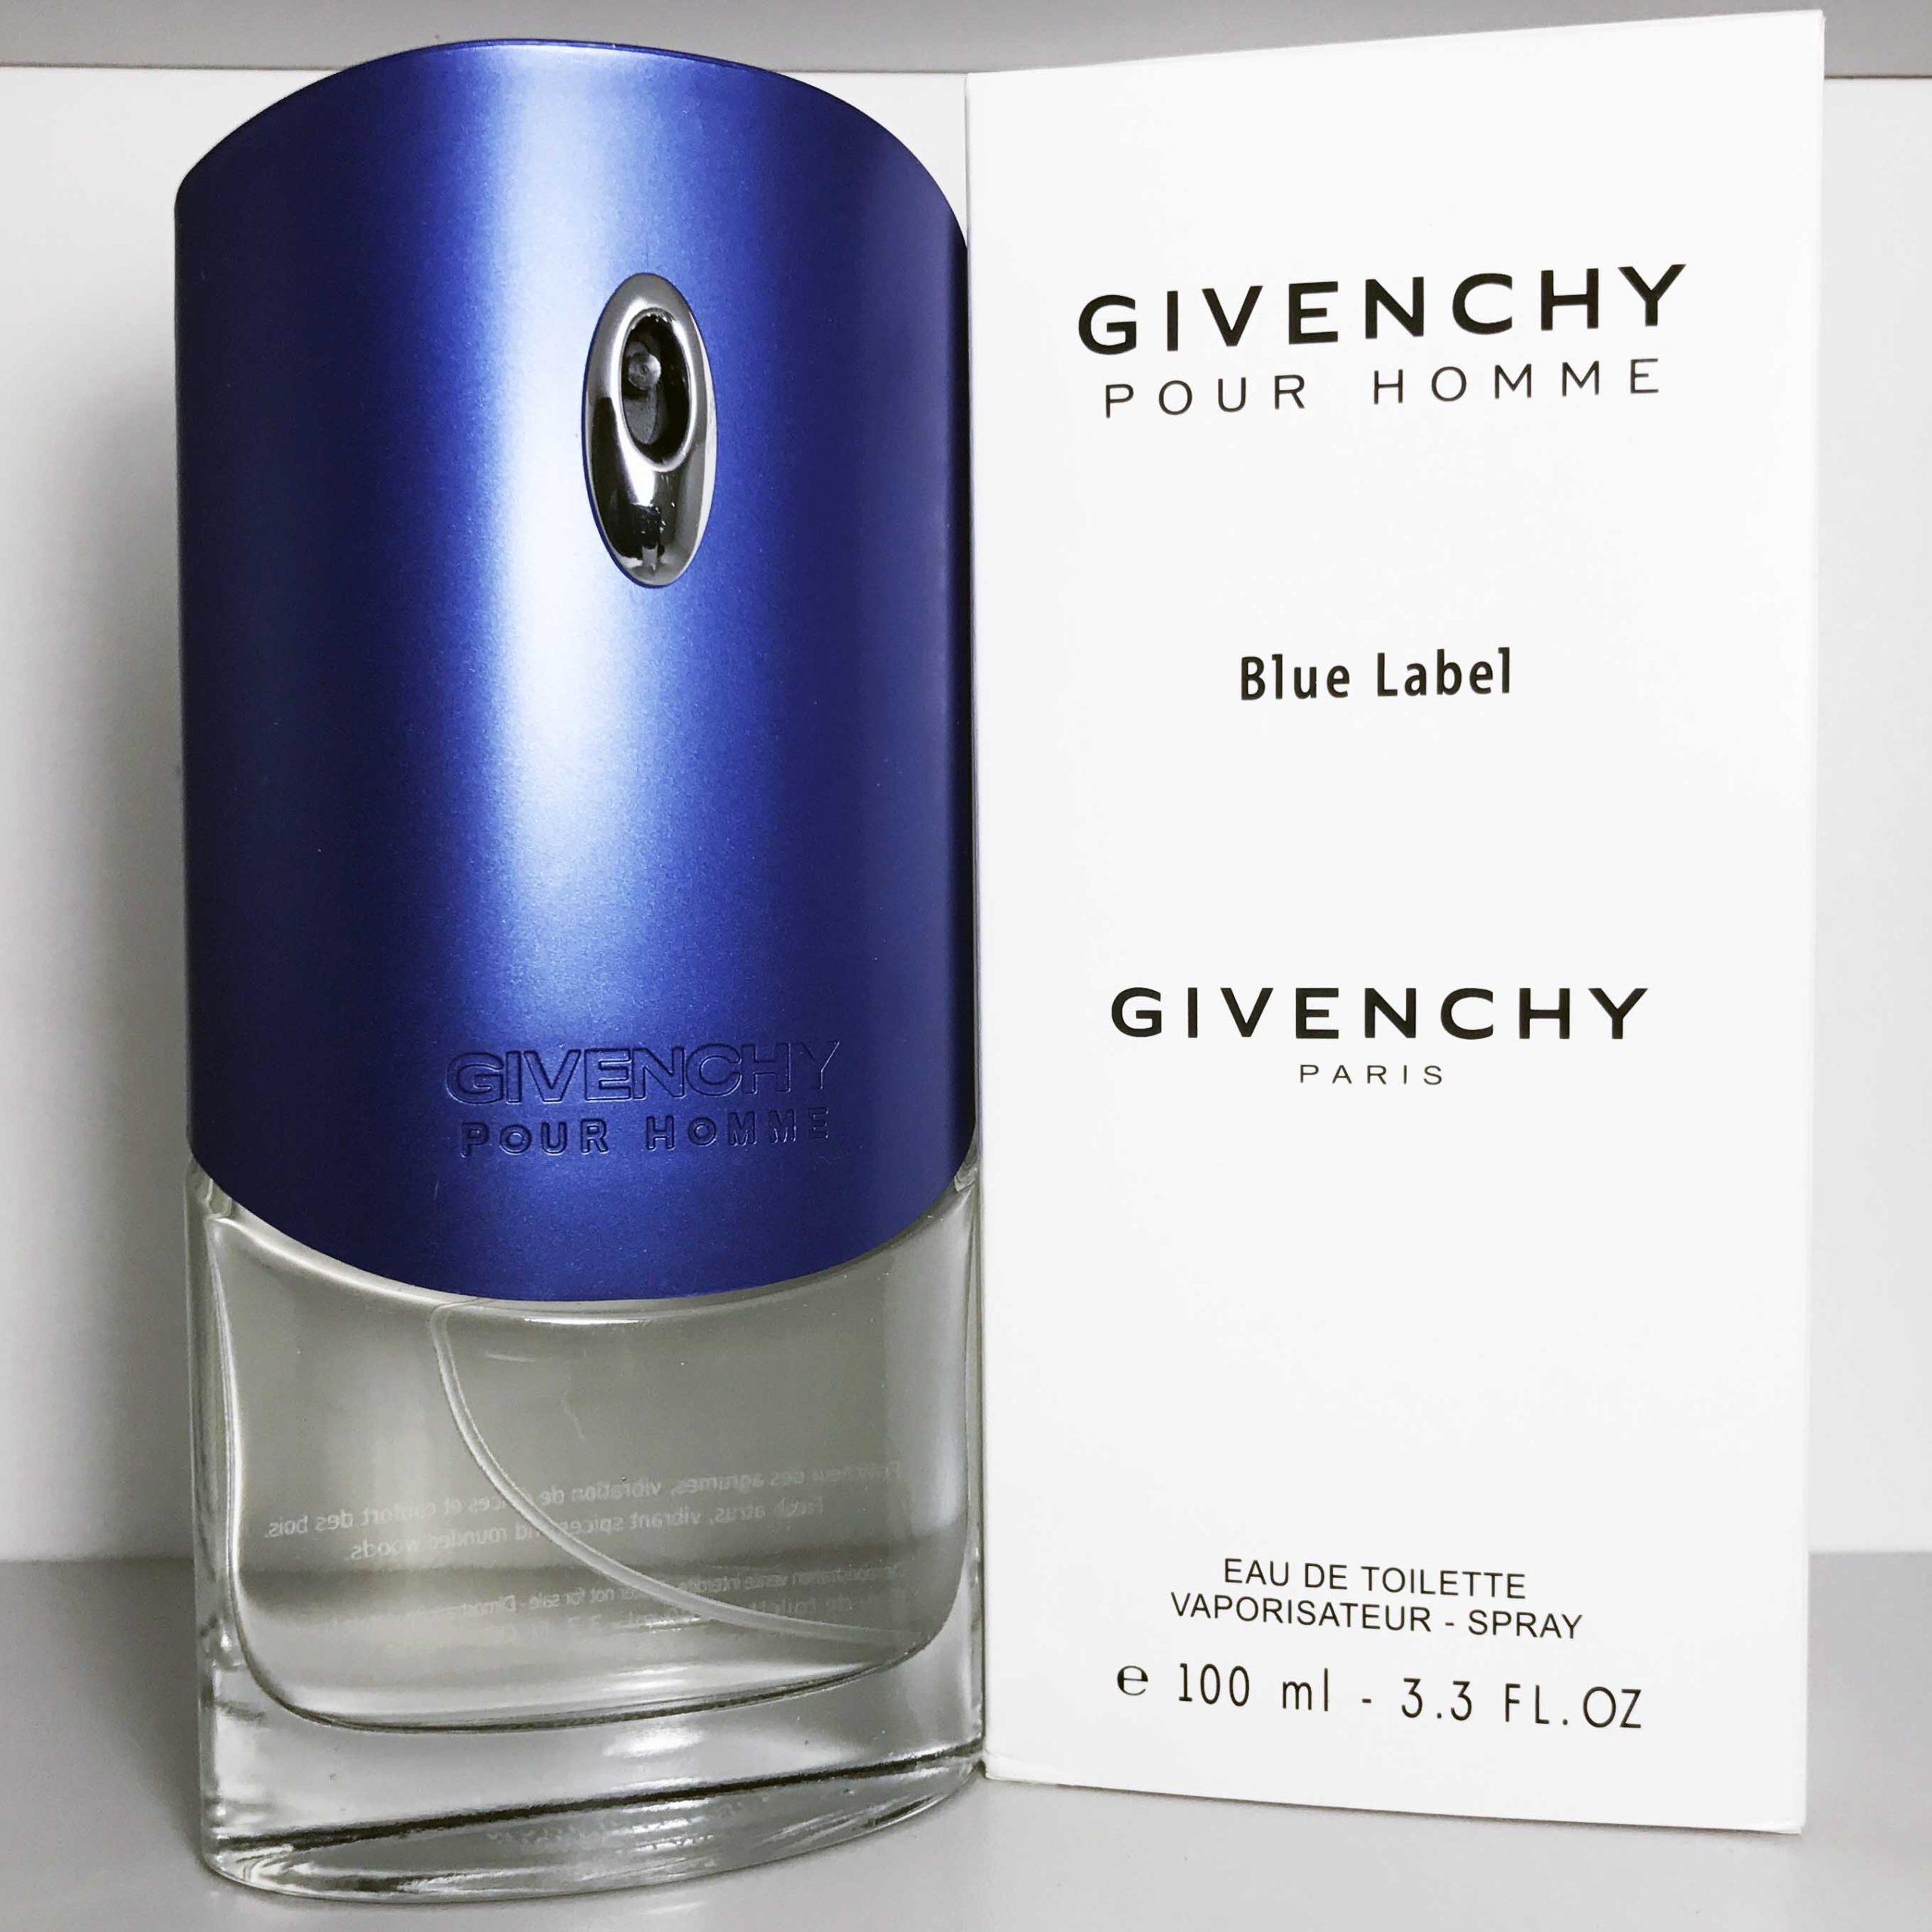 Туалетная вода givenchy pour homme. Givenchy pour homme тестер 100. Духи живанши Блю. Givenchy pour homme Blue Label. Givenchy pour homme Blue Label туалетная вода мужская 100 мл.